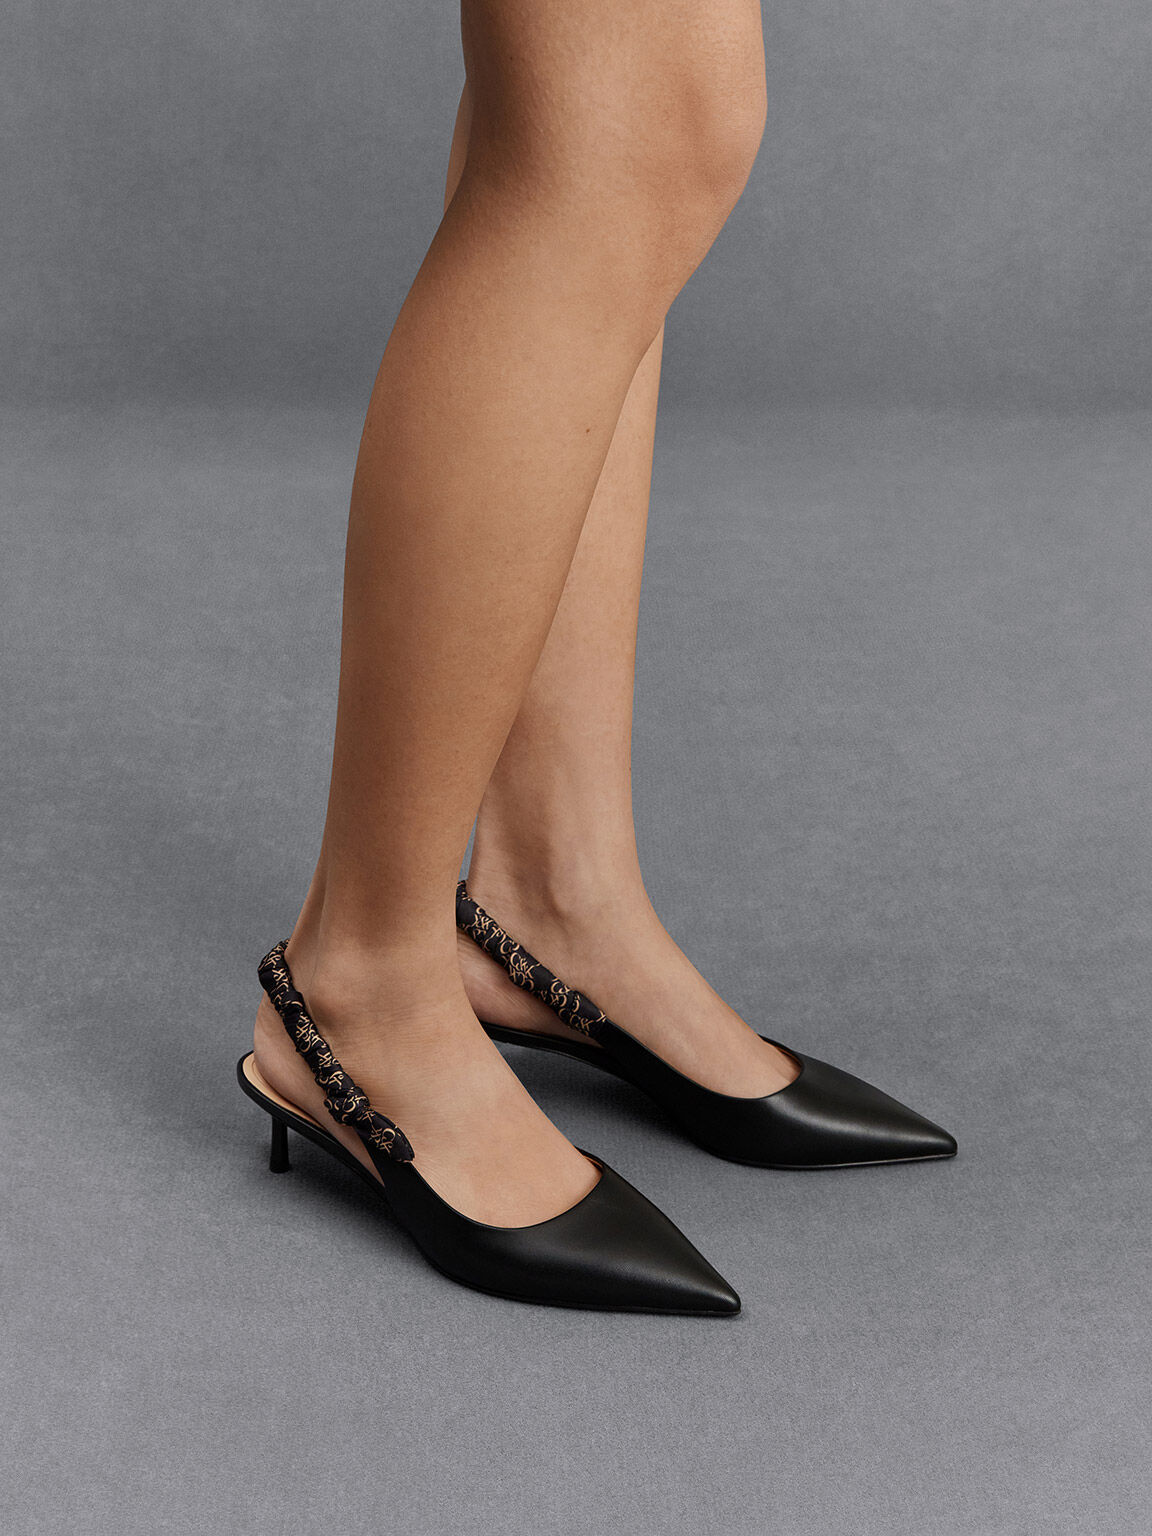 Buy Black Heeled Shoes for Women by Ginger by lifestyle Online | Ajio.com